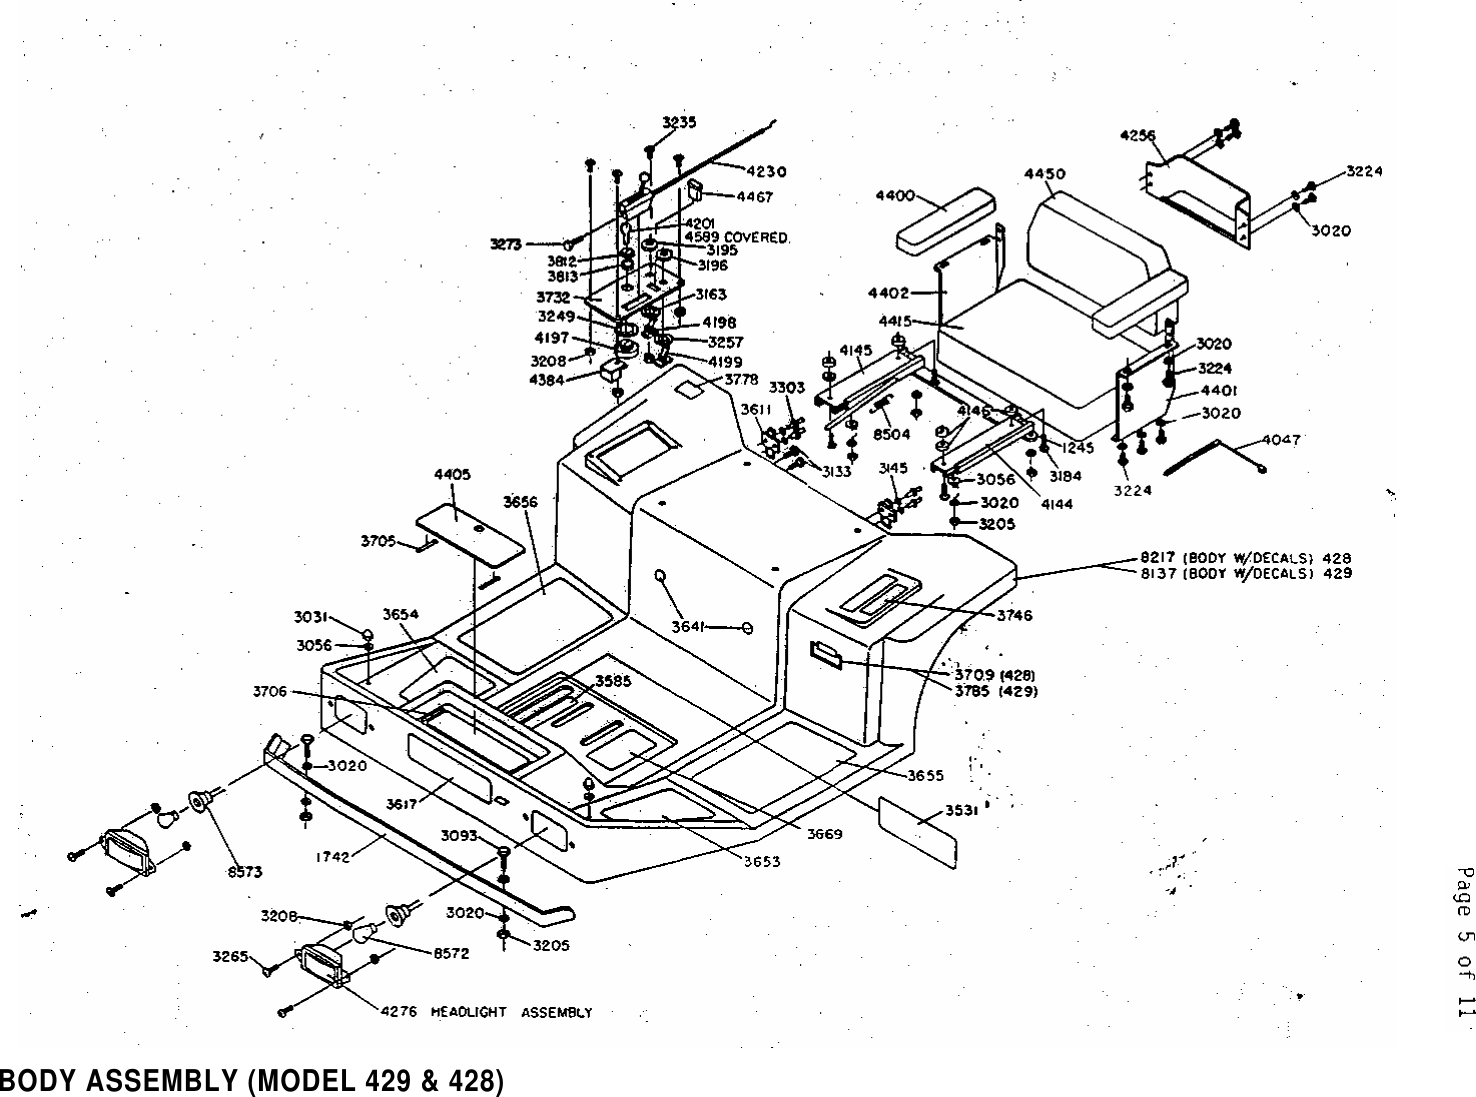 Page 3 of 6 - Dixon Dixon-Ztr-428-Users-Manual- 1990 Technical Data Brochure - ZTR 428 & 429  Dixon-ztr-428-users-manual